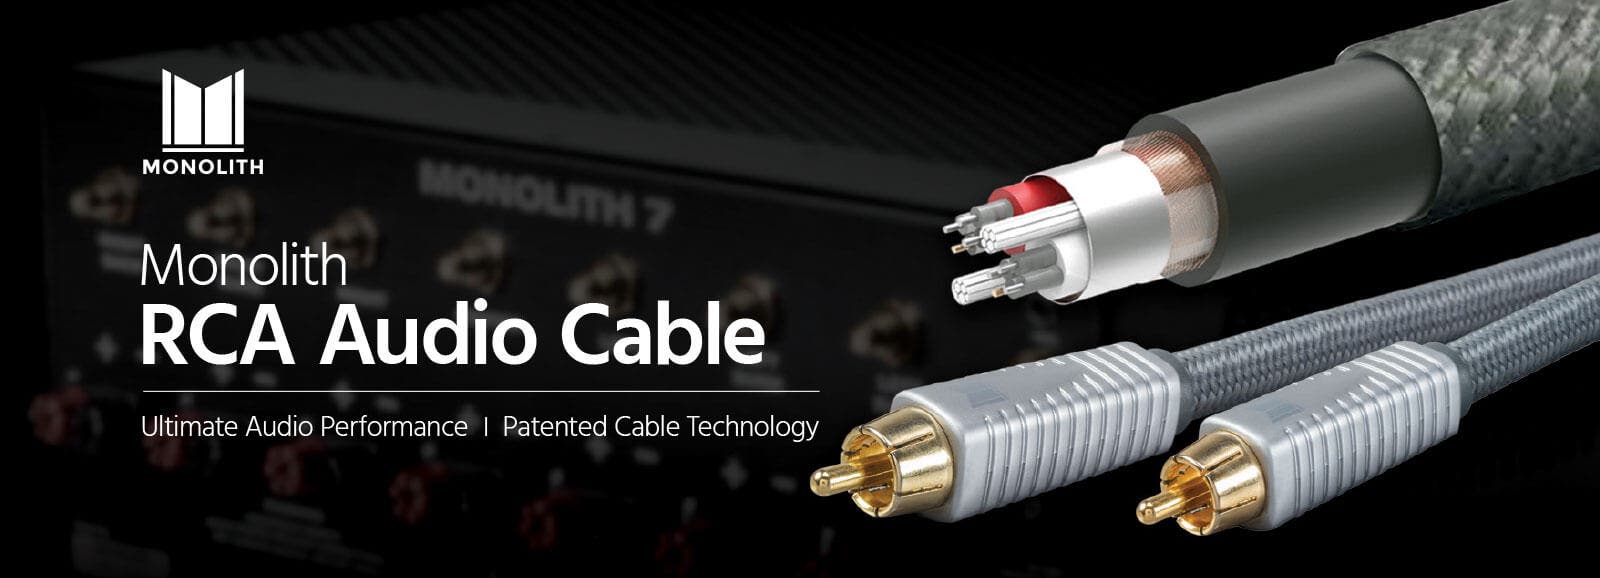 Monolith RCA Audio Cable Product Details.jpg